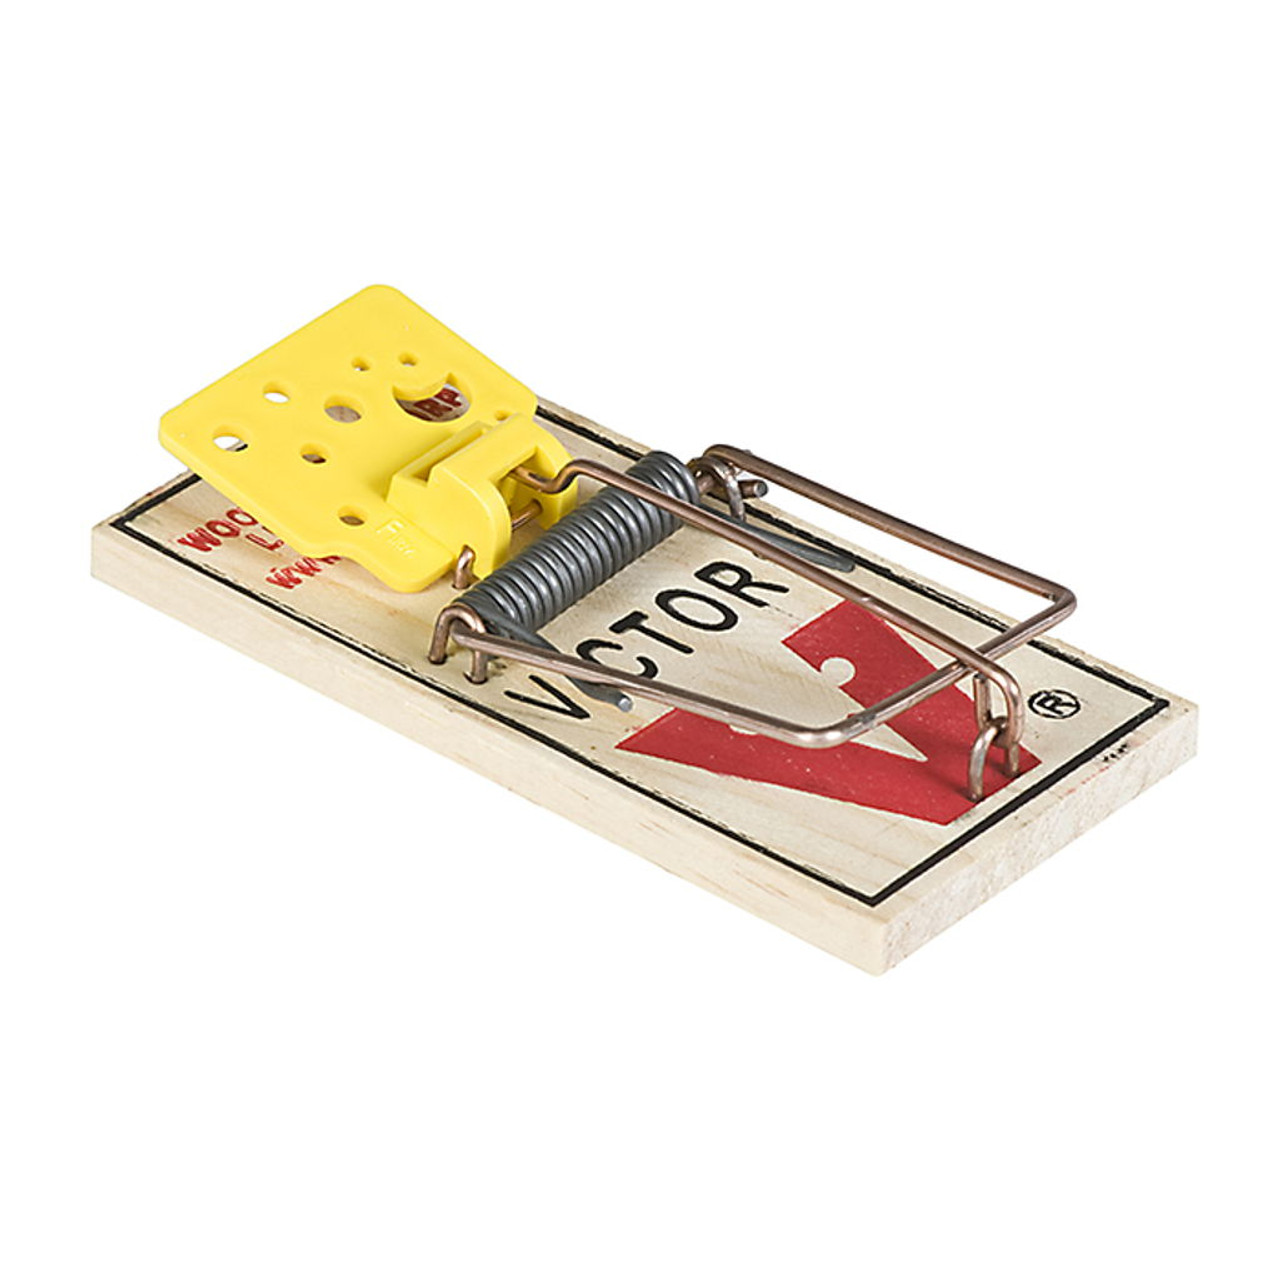 Victor Metal Pedal Mouse Trap Instructional Video 